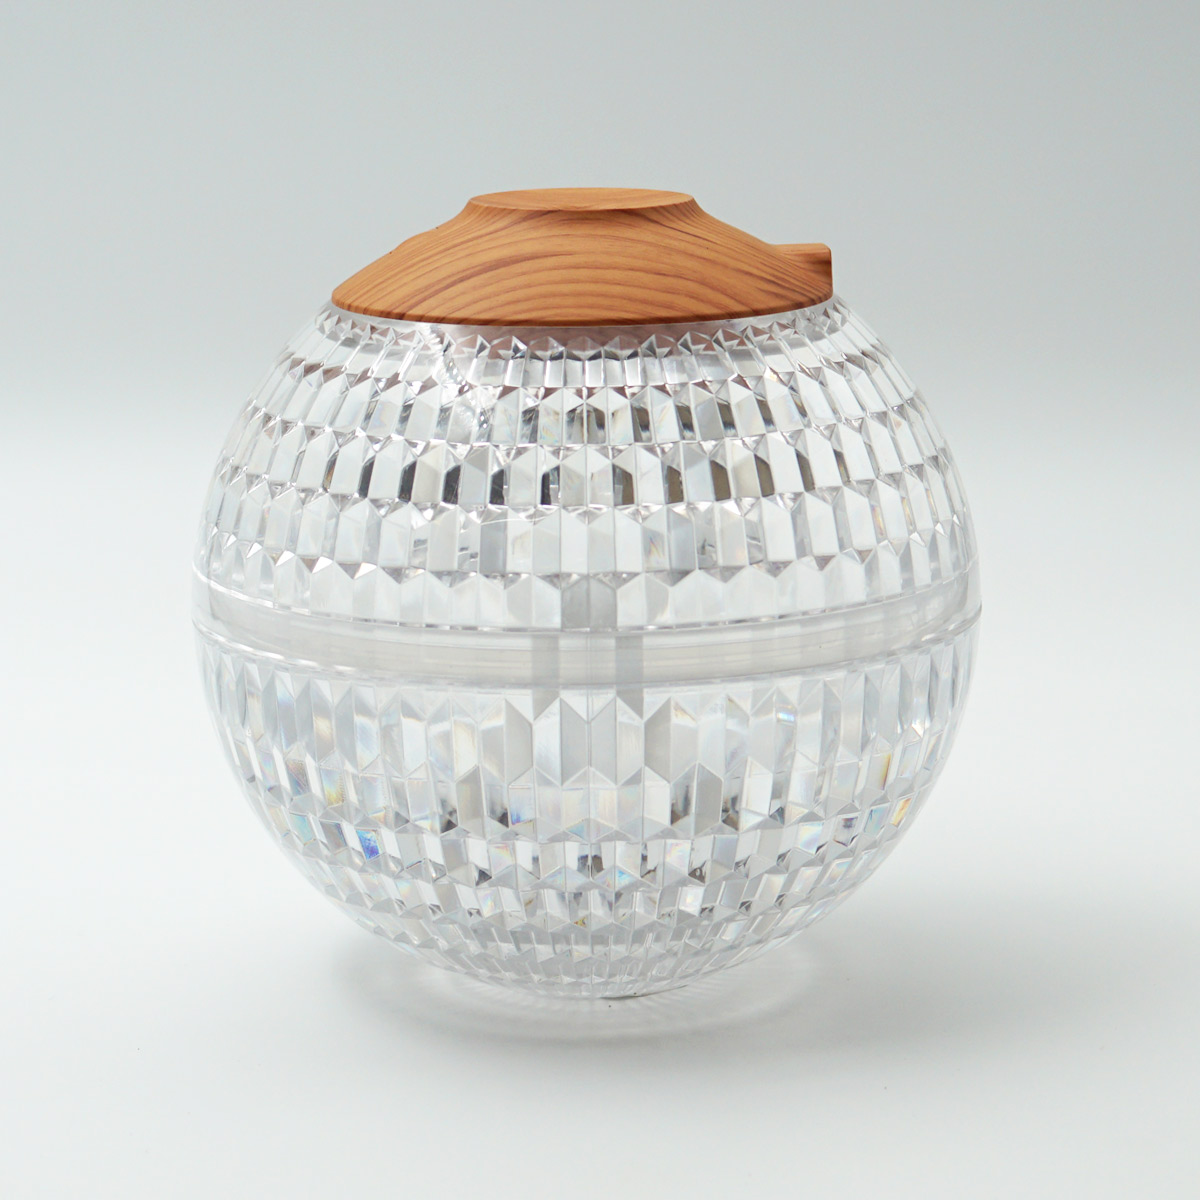 penhouse.in Humidifier with Colorful Night Light Crystal Ball Shape Auto Shut-Off 2 Mist Modes Super Quiet 2-in-1 Humidifier & Essential Oil Diffuser Portable USB SKU 96588